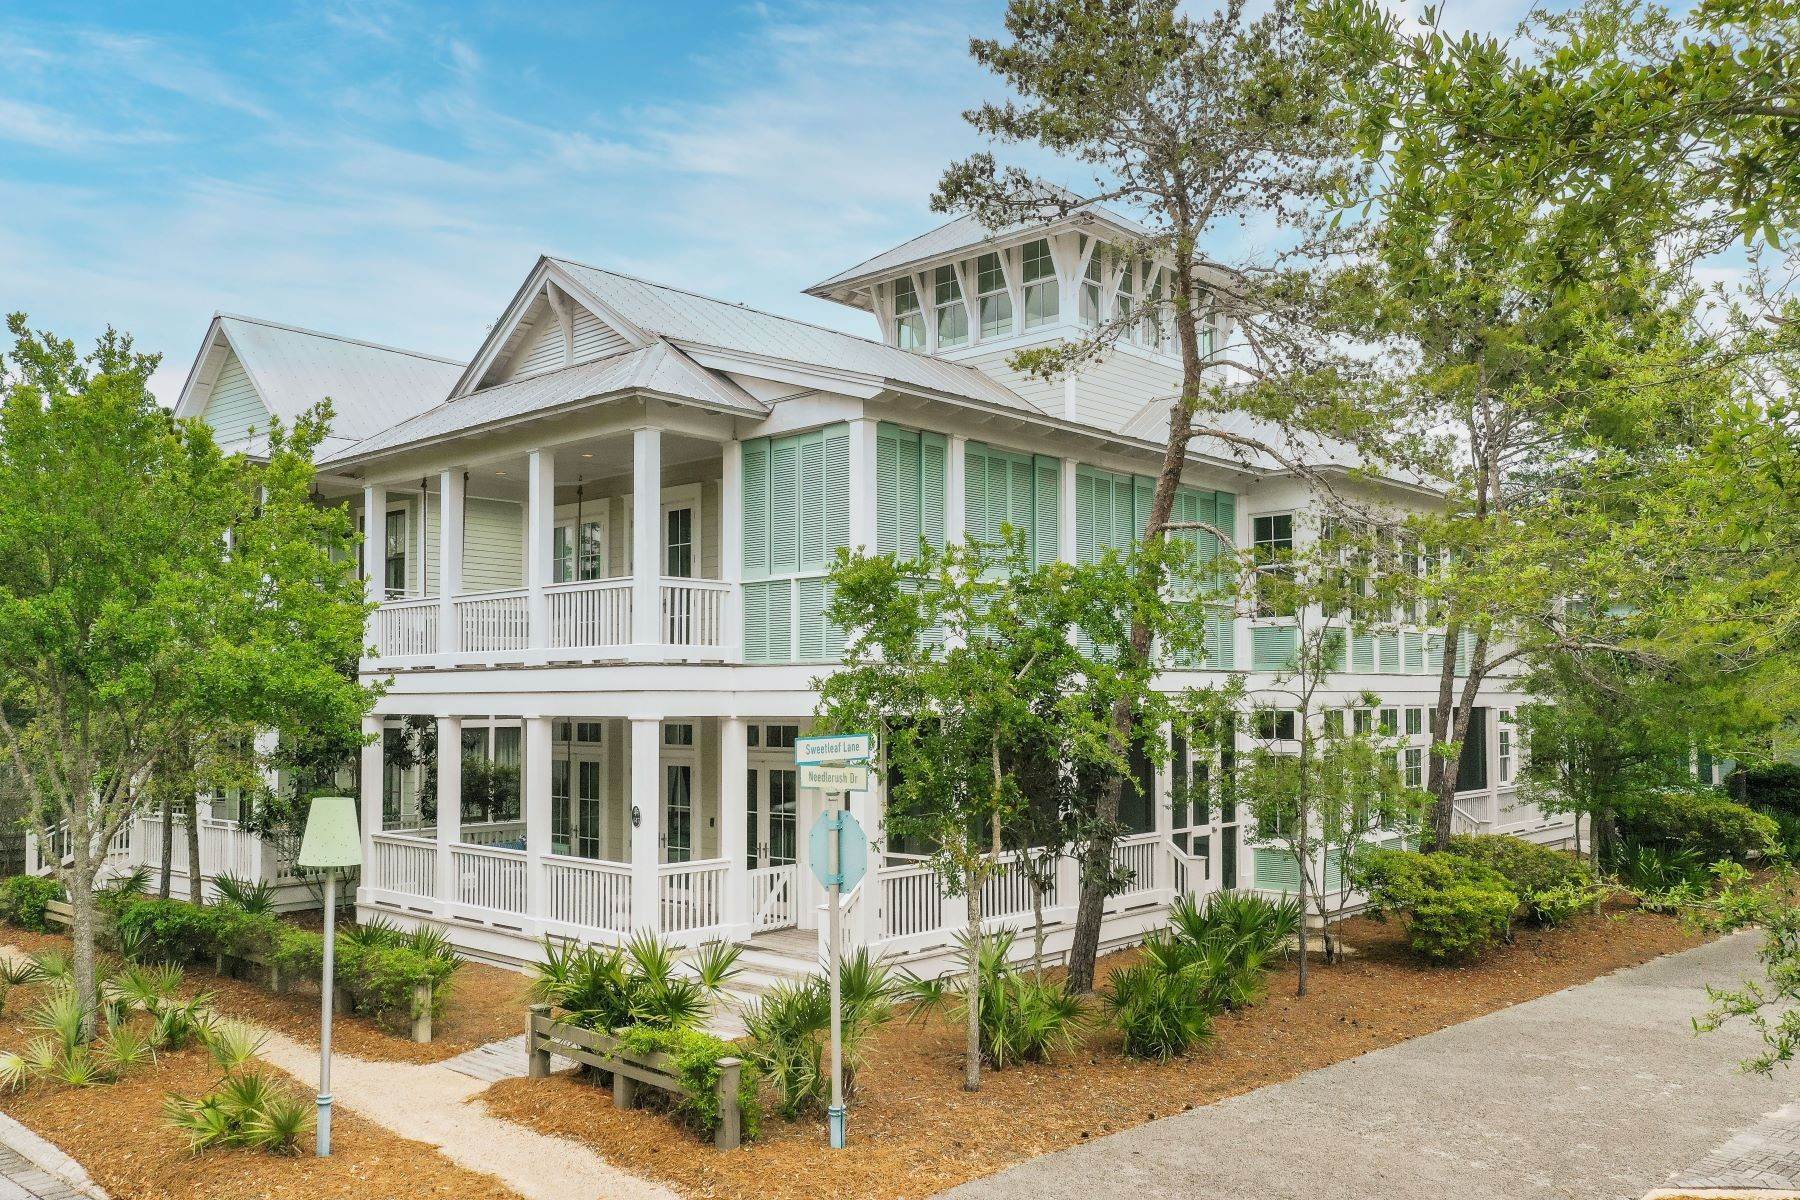 Single Family Homes for Sale at Updated WaterColor Home with Carriage House on Corner Lot 147 Needlerush Drive Santa Rosa Beach, Florida 32459 United States